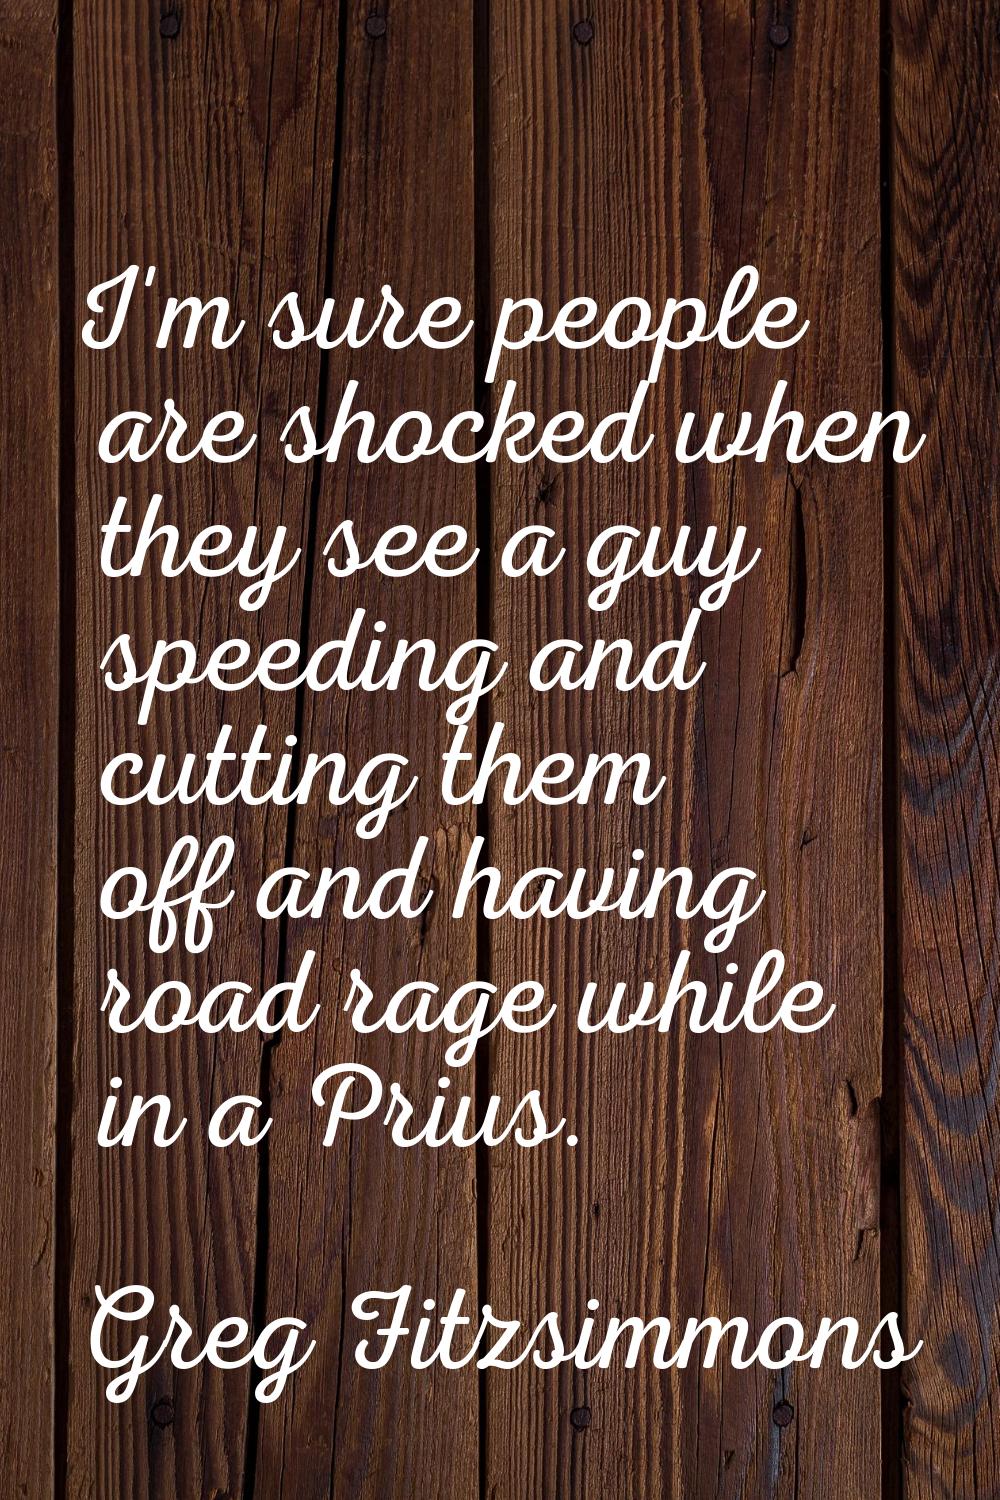 I'm sure people are shocked when they see a guy speeding and cutting them off and having road rage 